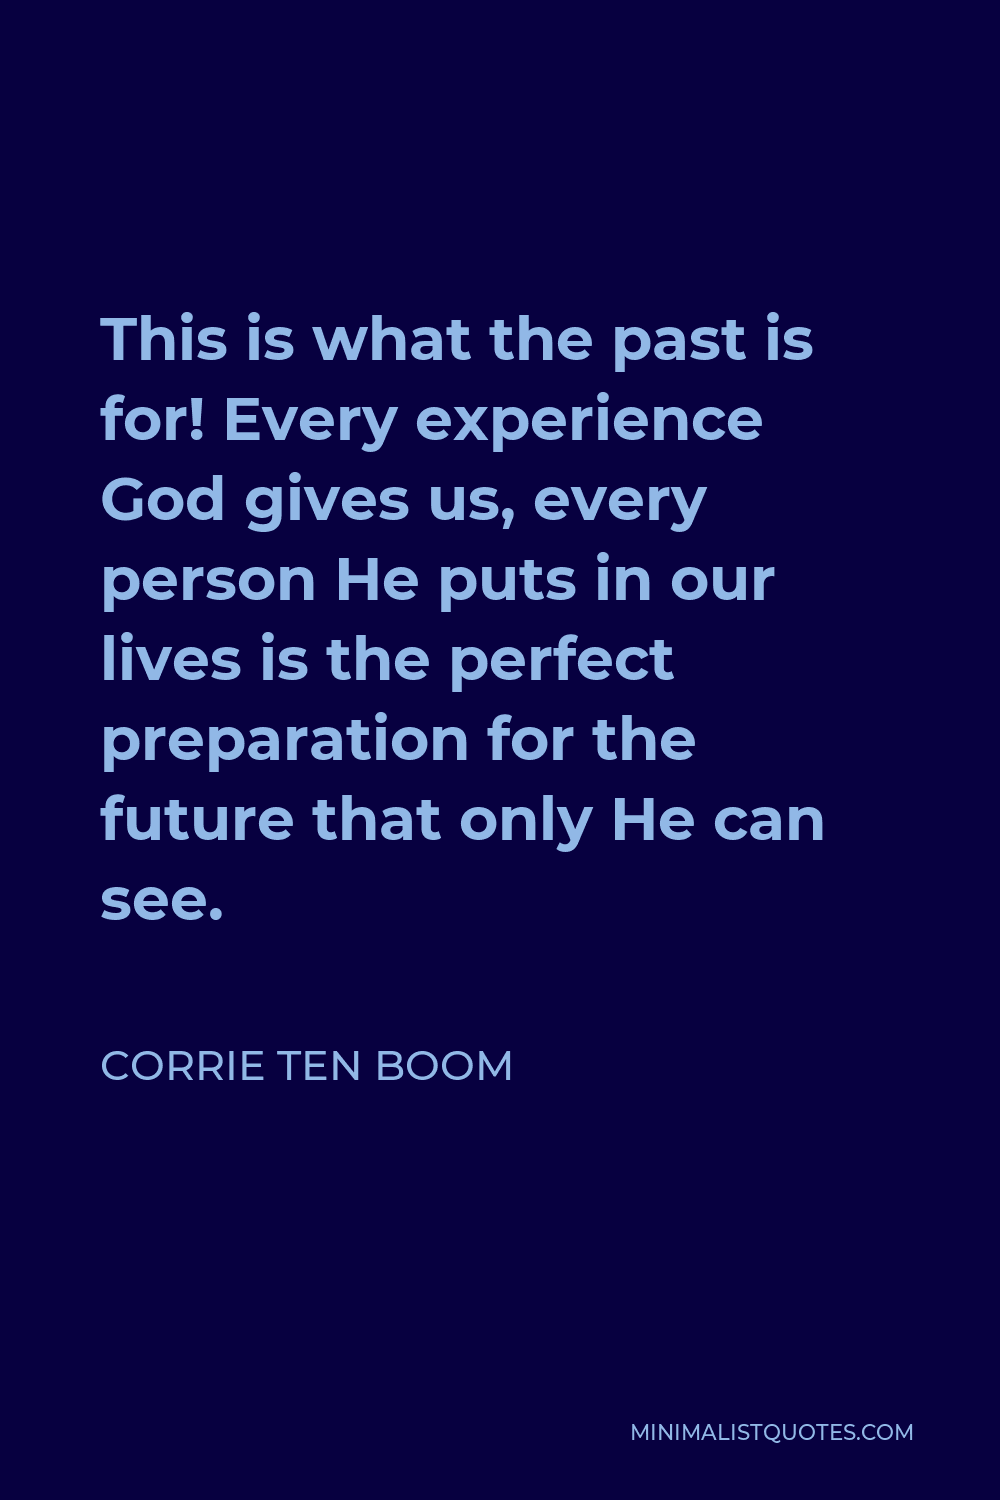 Corrie ten Boom Quote - This is what the past is for! Every experience God gives us, every person He puts in our lives is the perfect preparation for the future that only He can see.